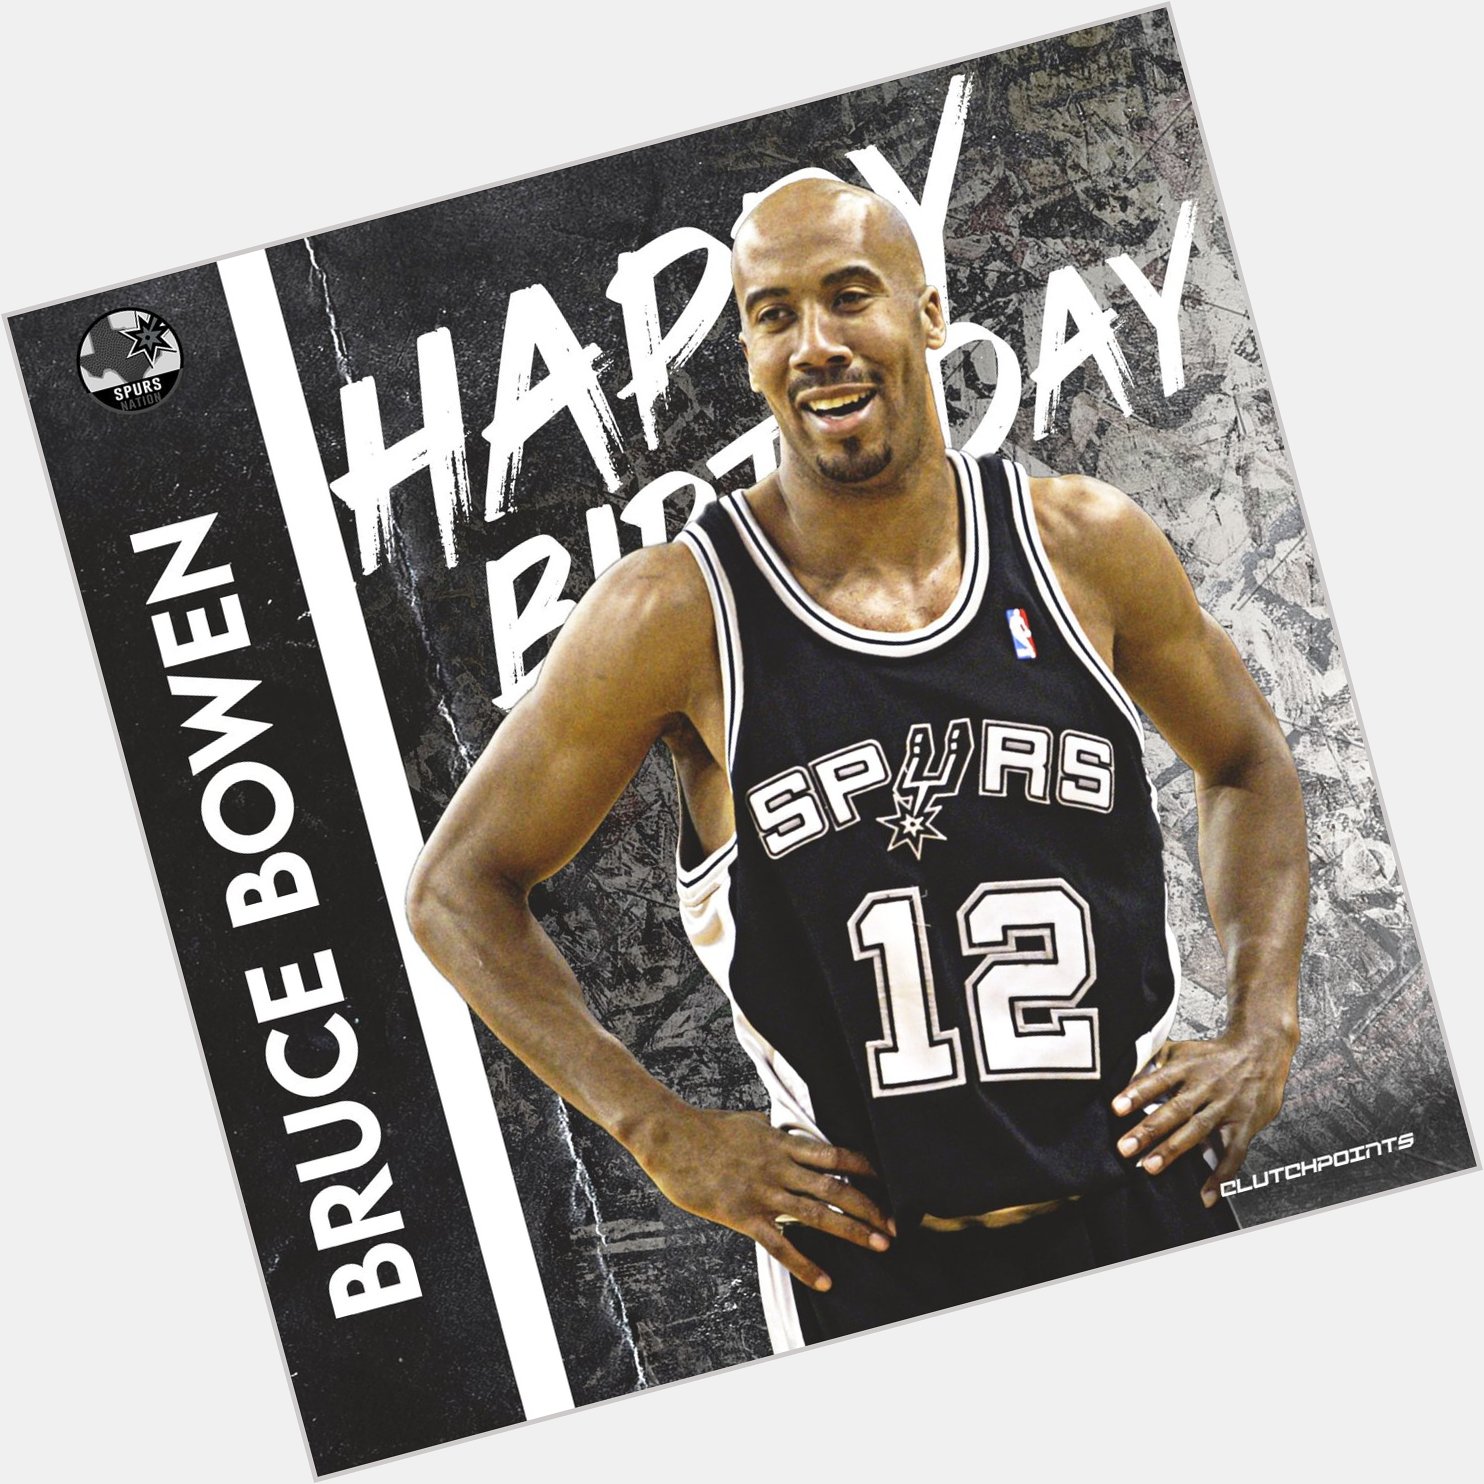 Spurs Nation, let\s all greet Bruce Bowen a happy 50th birthday!  